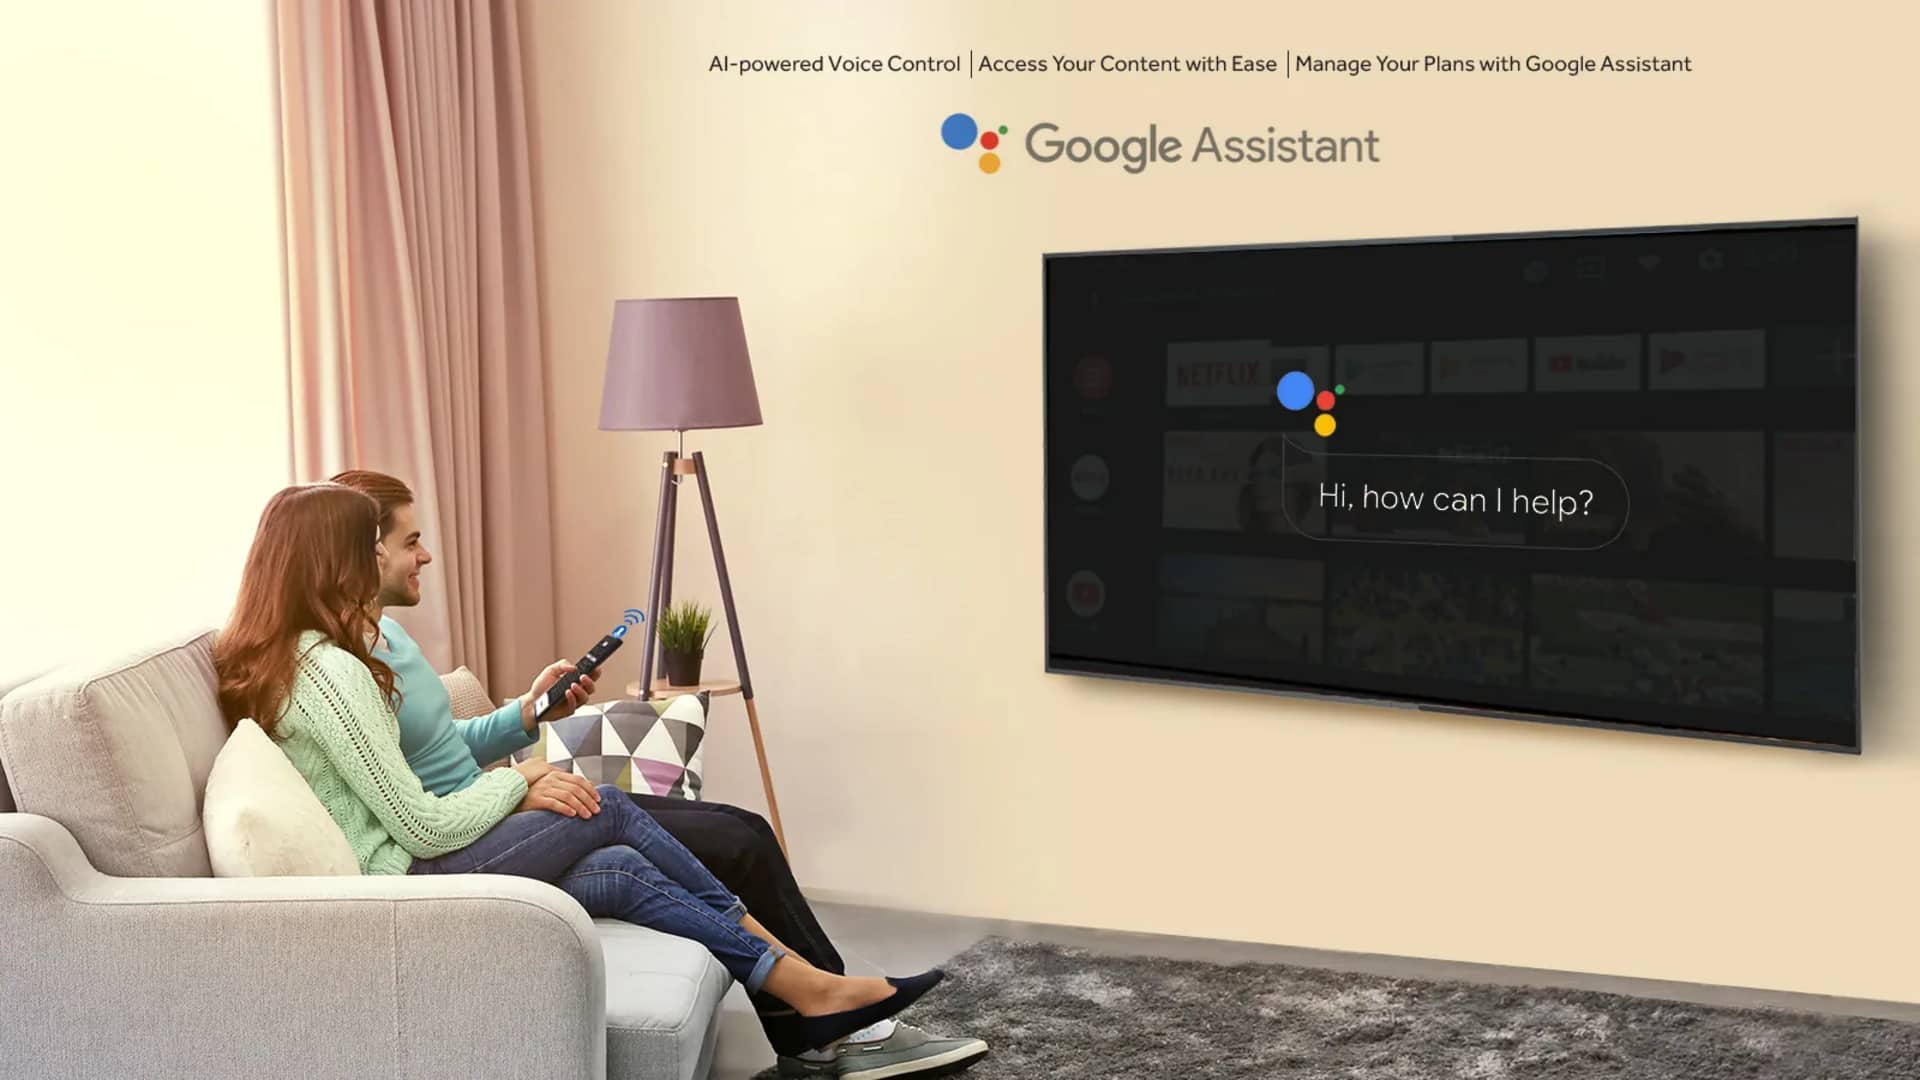 Samsung smart TVs to lose Google Assistant starting March